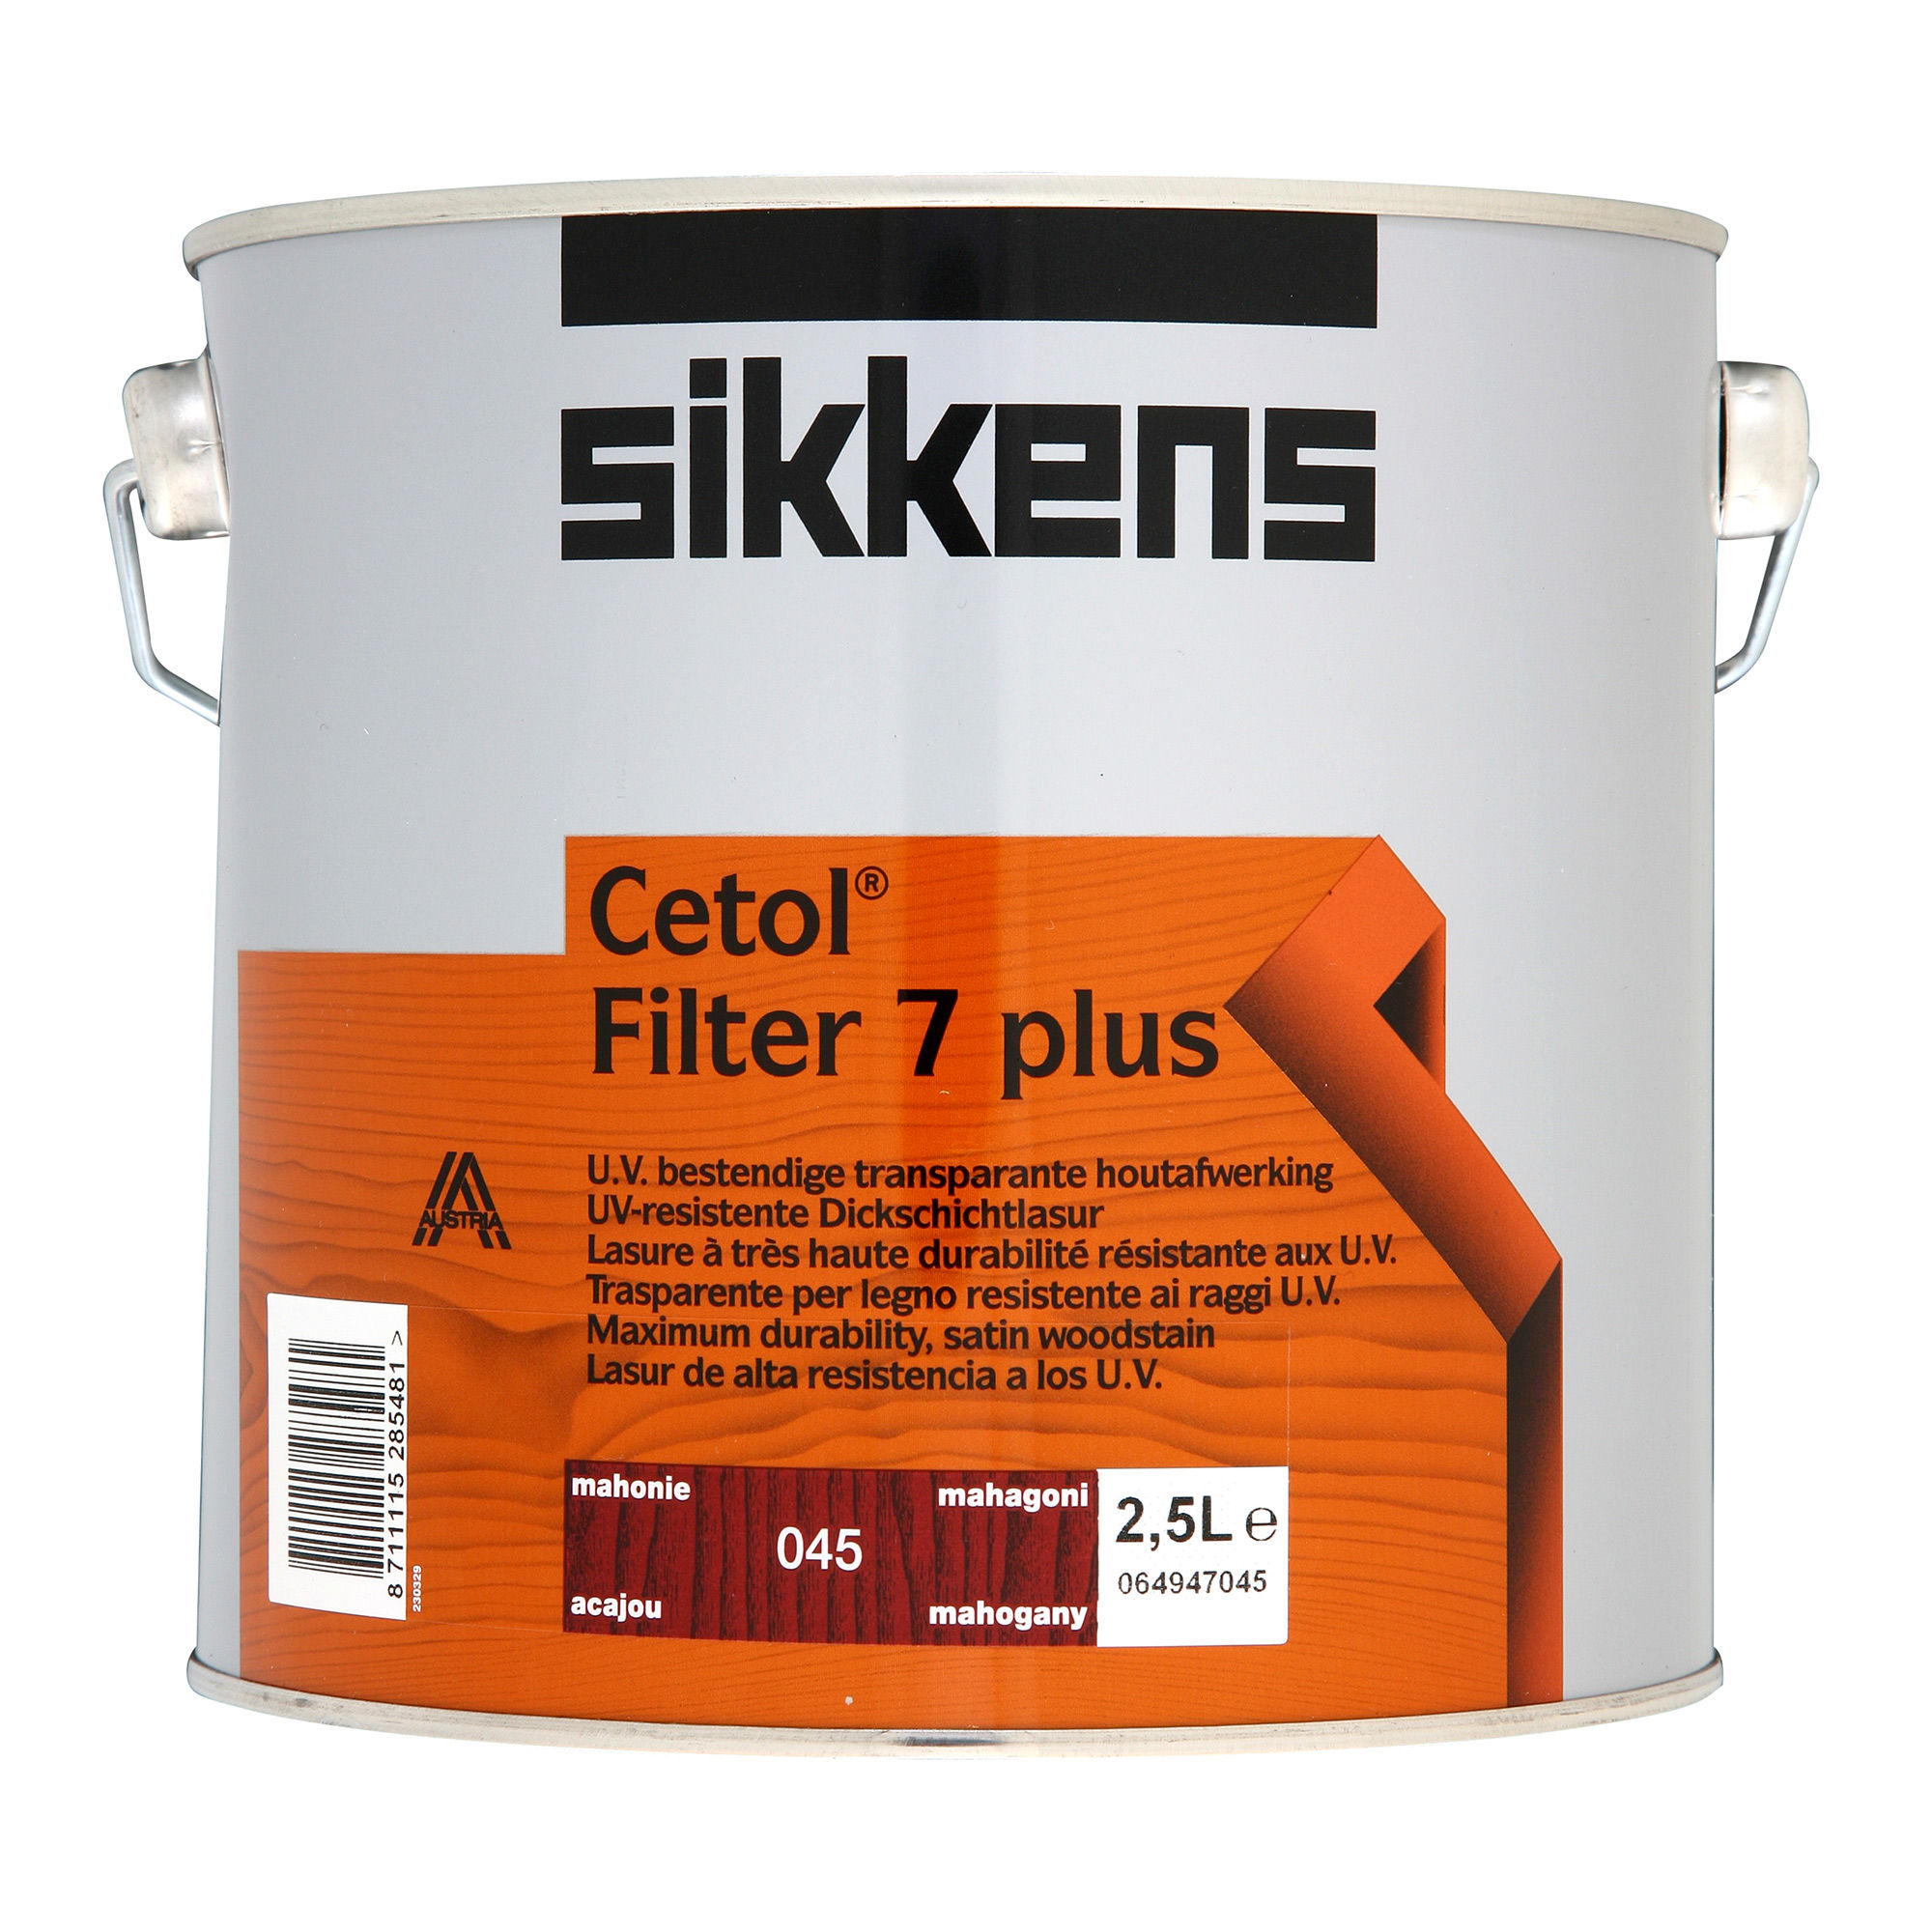 Sikkens Cetol Filter 7 Plus Wood Stain – Mahogany 045 (2.5L)